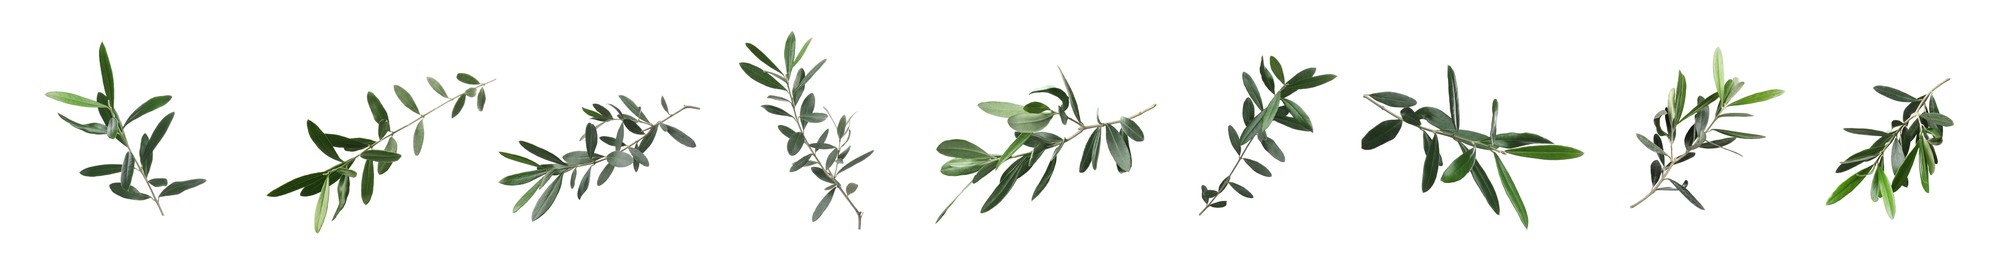 Image of Set of olive twigs with fresh green leaves on white background. Banner design